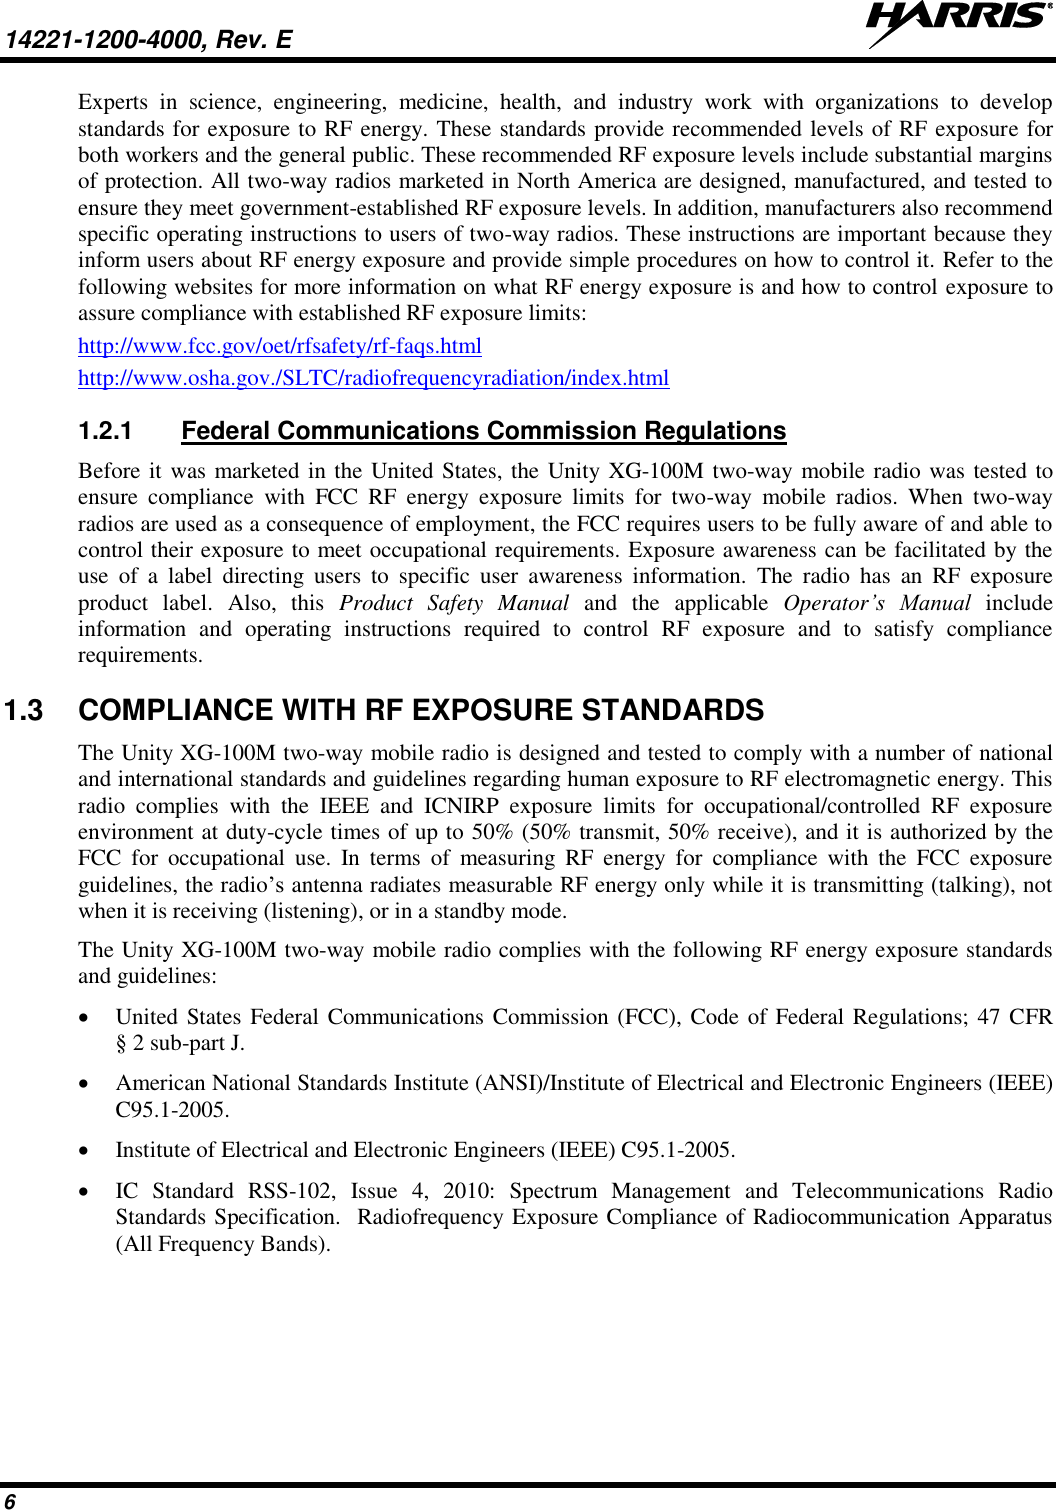 14221-1200-4000, Rev. E    6 Experts  in  science,  engineering,  medicine,  health,  and  industry  work  with  organizations  to  develop standards for exposure to RF energy. These standards provide recommended levels of RF exposure for both workers and the general public. These recommended RF exposure levels include substantial margins of protection. All two-way radios marketed in North America are designed, manufactured, and tested to ensure they meet government-established RF exposure levels. In addition, manufacturers also recommend specific operating instructions to users of two-way radios. These instructions are important because they inform users about RF energy exposure and provide simple procedures on how to control it. Refer to the following websites for more information on what RF energy exposure is and how to control exposure to assure compliance with established RF exposure limits: http://www.fcc.gov/oet/rfsafety/rf-faqs.html http://www.osha.gov./SLTC/radiofrequencyradiation/index.html 1.2.1  Federal Communications Commission Regulations Before it was marketed in the United States, the Unity XG-100M two-way mobile radio was tested to ensure  compliance  with  FCC  RF  energy  exposure  limits  for  two-way  mobile  radios.  When  two-way radios are used as a consequence of employment, the FCC requires users to be fully aware of and able to control their exposure to meet occupational requirements. Exposure awareness can be facilitated by the use  of  a  label  directing  users  to  specific  user  awareness  information.  The  radio  has  an  RF  exposure product  label.  Also,  this  Product  Safety  Manual  and  the  applicable  Operator’s  Manual  include information  and  operating  instructions  required  to  control  RF  exposure  and  to  satisfy  compliance requirements. 1.3  COMPLIANCE WITH RF EXPOSURE STANDARDS The Unity XG-100M two-way mobile radio is designed and tested to comply with a number of national and international standards and guidelines regarding human exposure to RF electromagnetic energy. This radio  complies  with  the  IEEE  and  ICNIRP  exposure  limits  for  occupational/controlled  RF  exposure environment at duty-cycle times of up to 50% (50% transmit, 50% receive), and it is authorized by the FCC  for  occupational  use.  In  terms  of  measuring  RF  energy  for  compliance  with  the  FCC  exposure guidelines, the radio’s antenna radiates measurable RF energy only while it is transmitting (talking), not when it is receiving (listening), or in a standby mode. The Unity XG-100M two-way mobile radio complies with the following RF energy exposure standards and guidelines:  United States Federal Communications Commission (FCC), Code of Federal Regulations; 47 CFR § 2 sub-part J.  American National Standards Institute (ANSI)/Institute of Electrical and Electronic Engineers (IEEE) C95.1-2005.  Institute of Electrical and Electronic Engineers (IEEE) C95.1-2005.  IC  Standard  RSS-102,  Issue  4,  2010:  Spectrum  Management  and  Telecommunications  Radio Standards Specification.  Radiofrequency Exposure Compliance of Radiocommunication Apparatus (All Frequency Bands).  